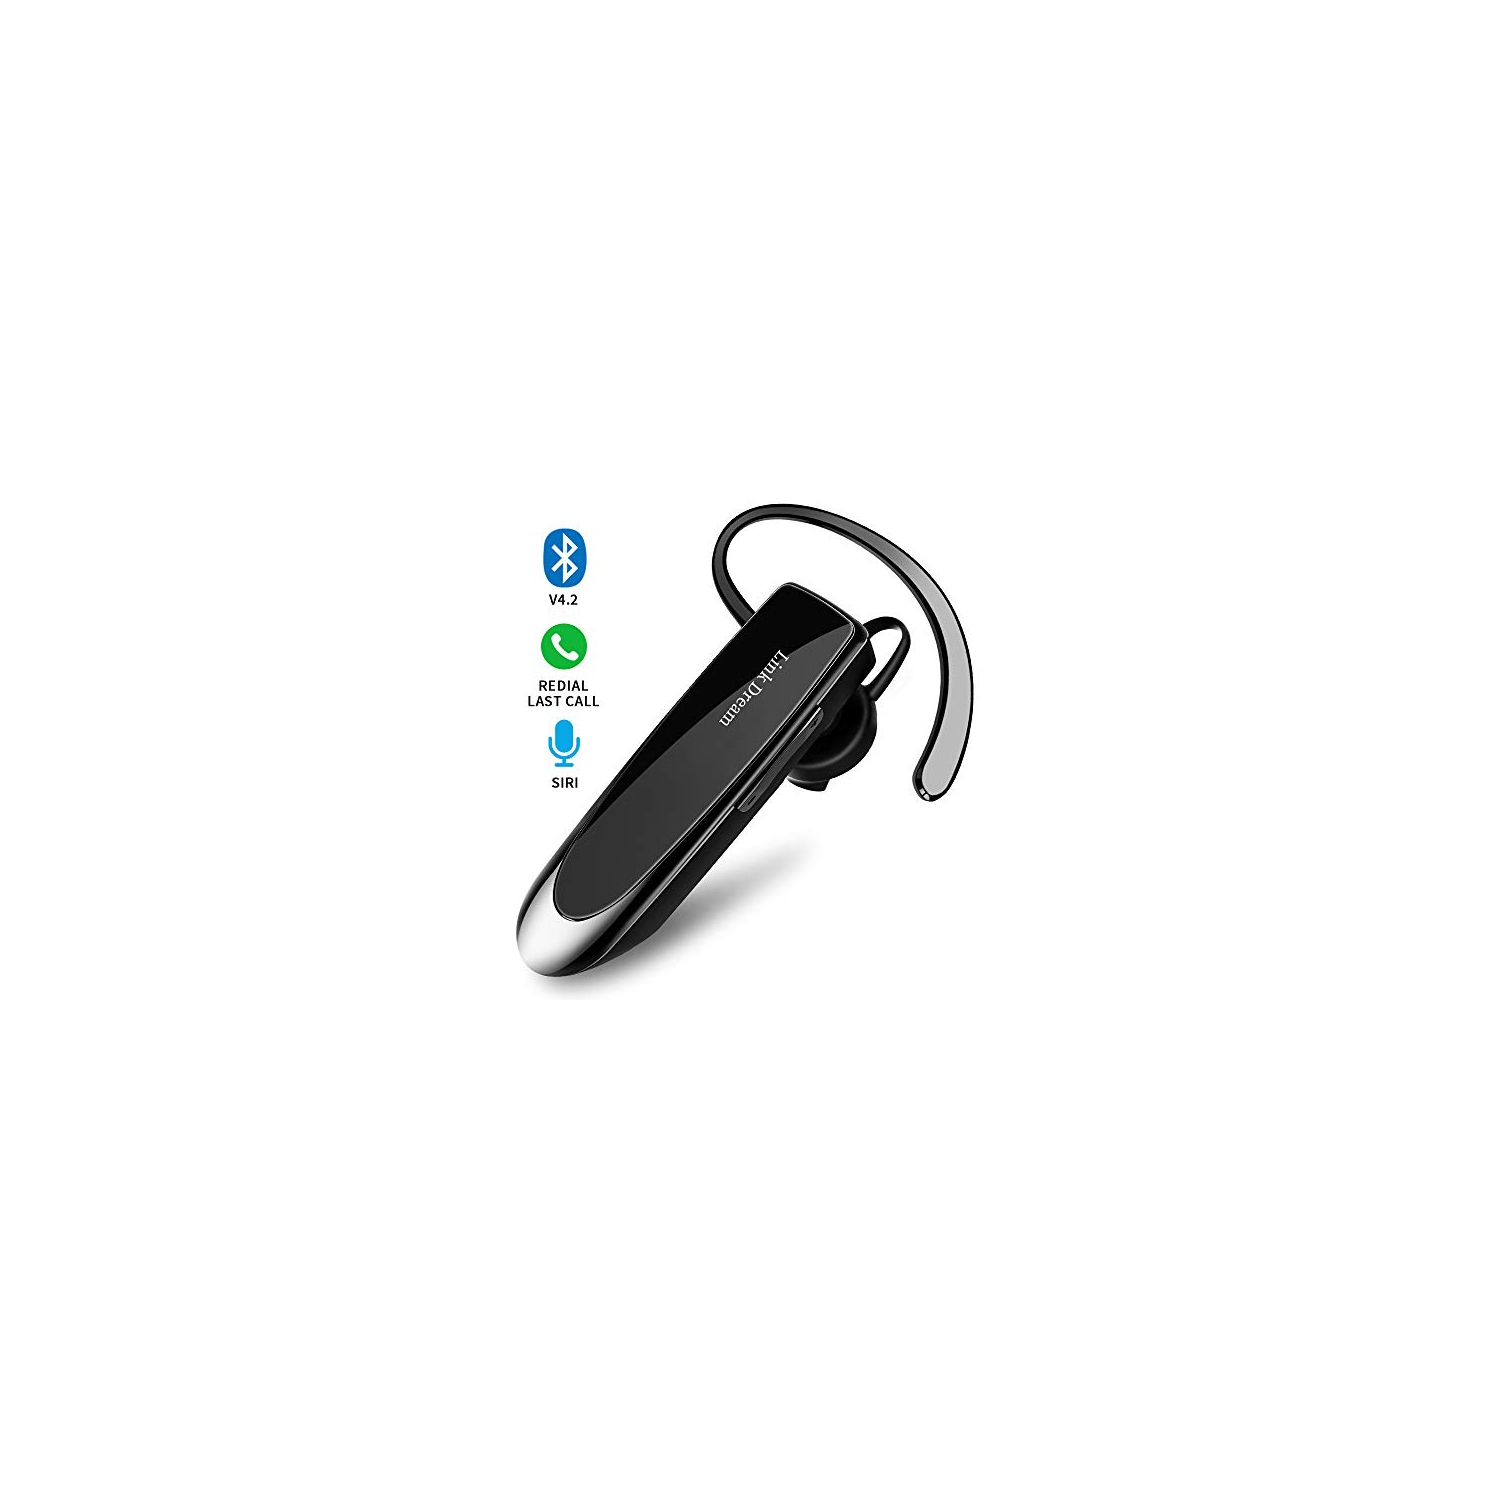 Bluetooth Earpiece Link Dream Wireless Headset with Mic 24Hrs Talktime Hands-Free in-Ear Headphone Compatible with iPhone Sam